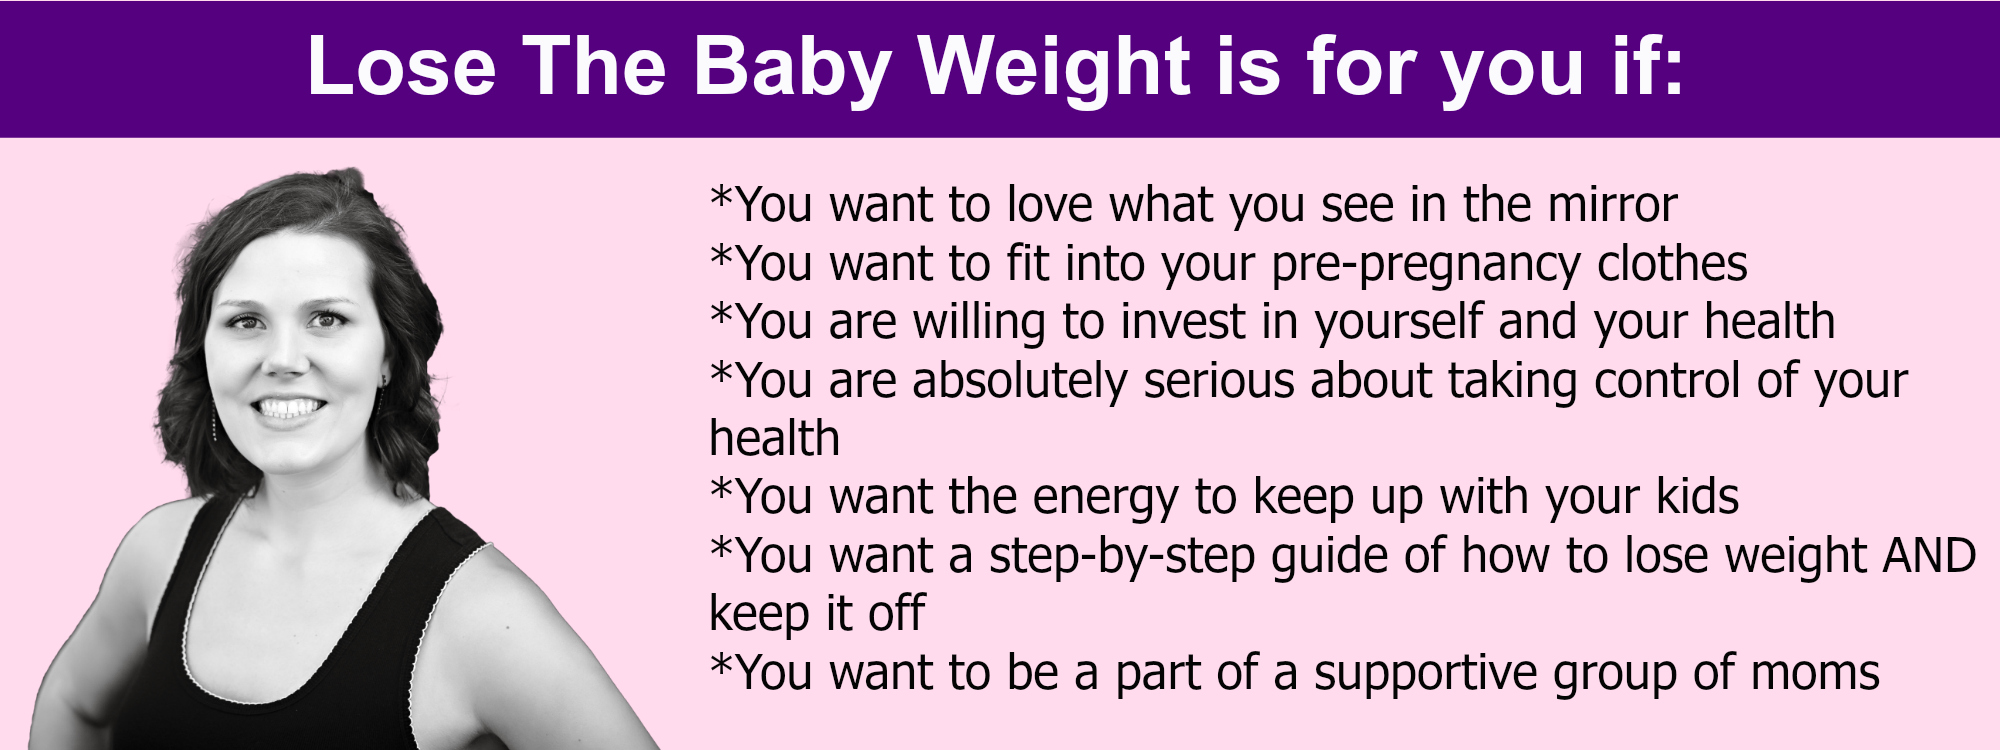 lose the baby weight 4